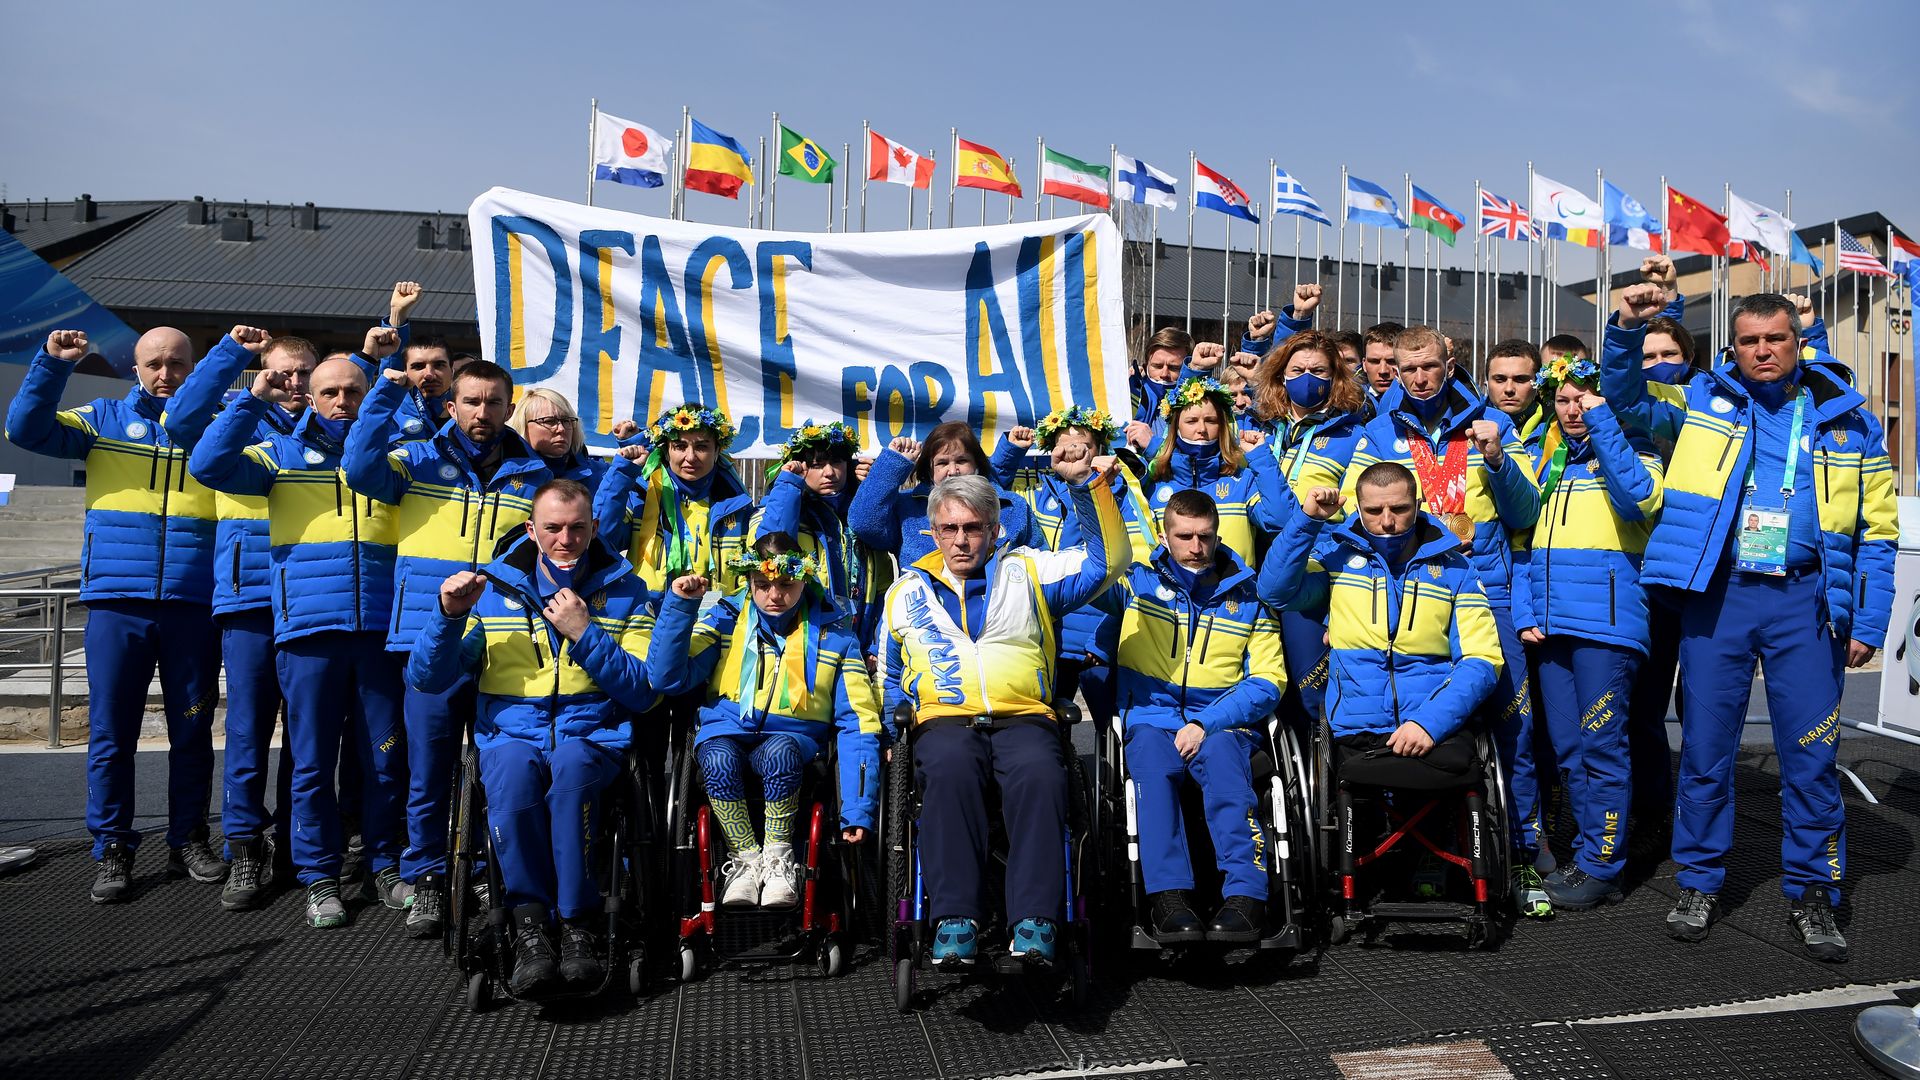 Ukraine Paralympic Committee holding a Peace for All sign with raised fists underneath